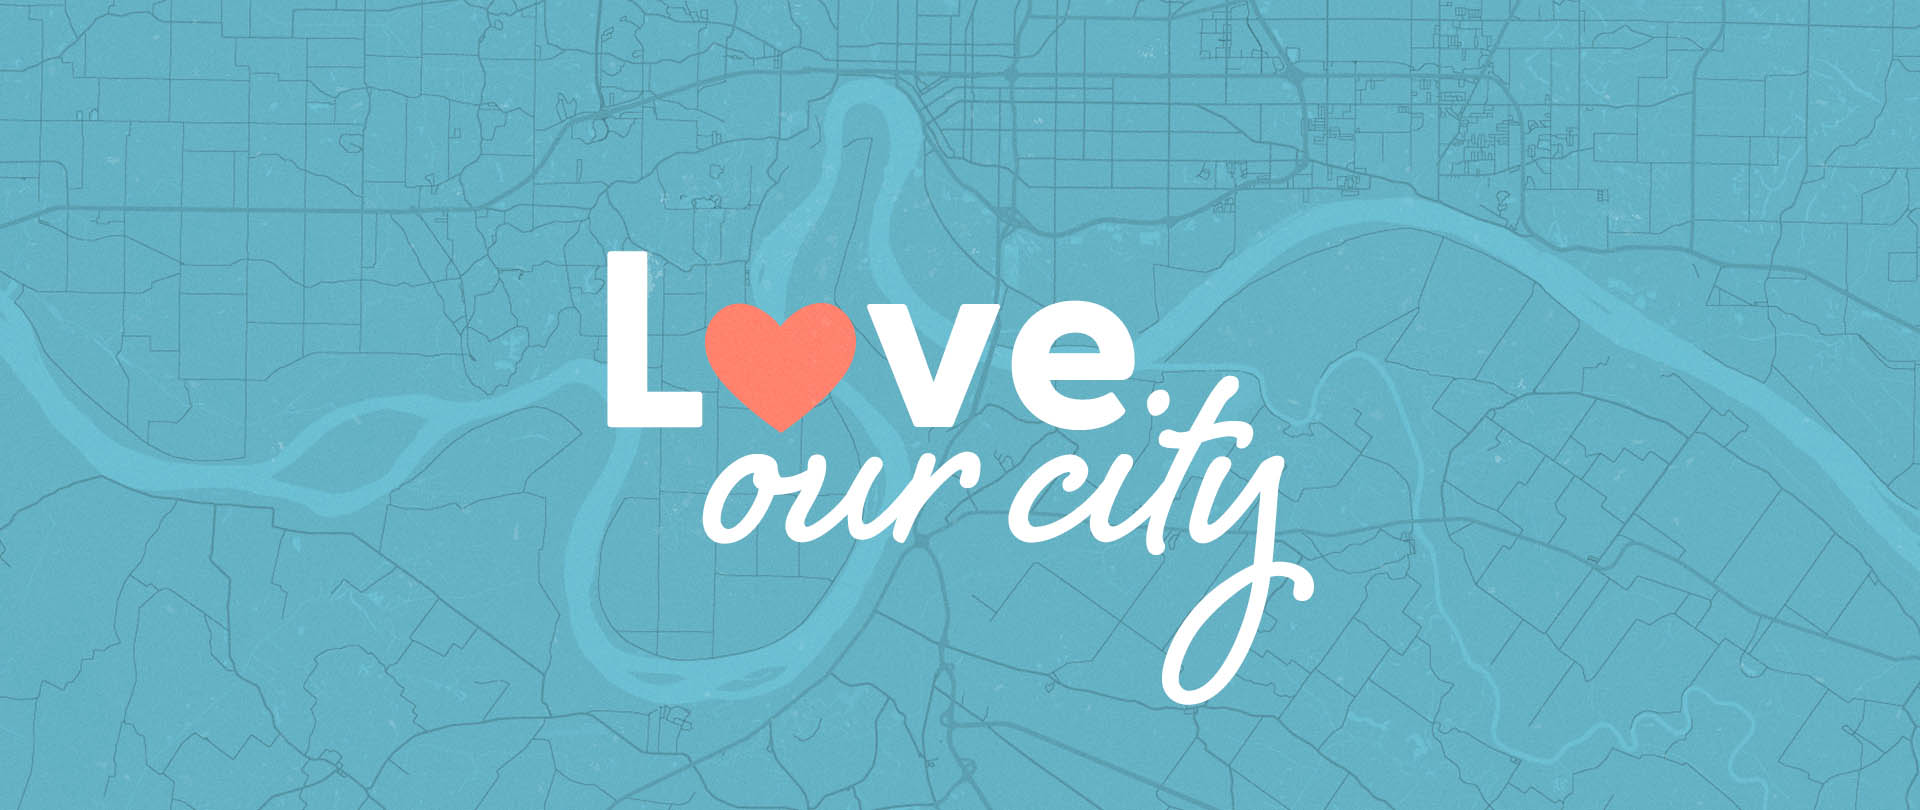 Love Our City
August 1-7, 2022
